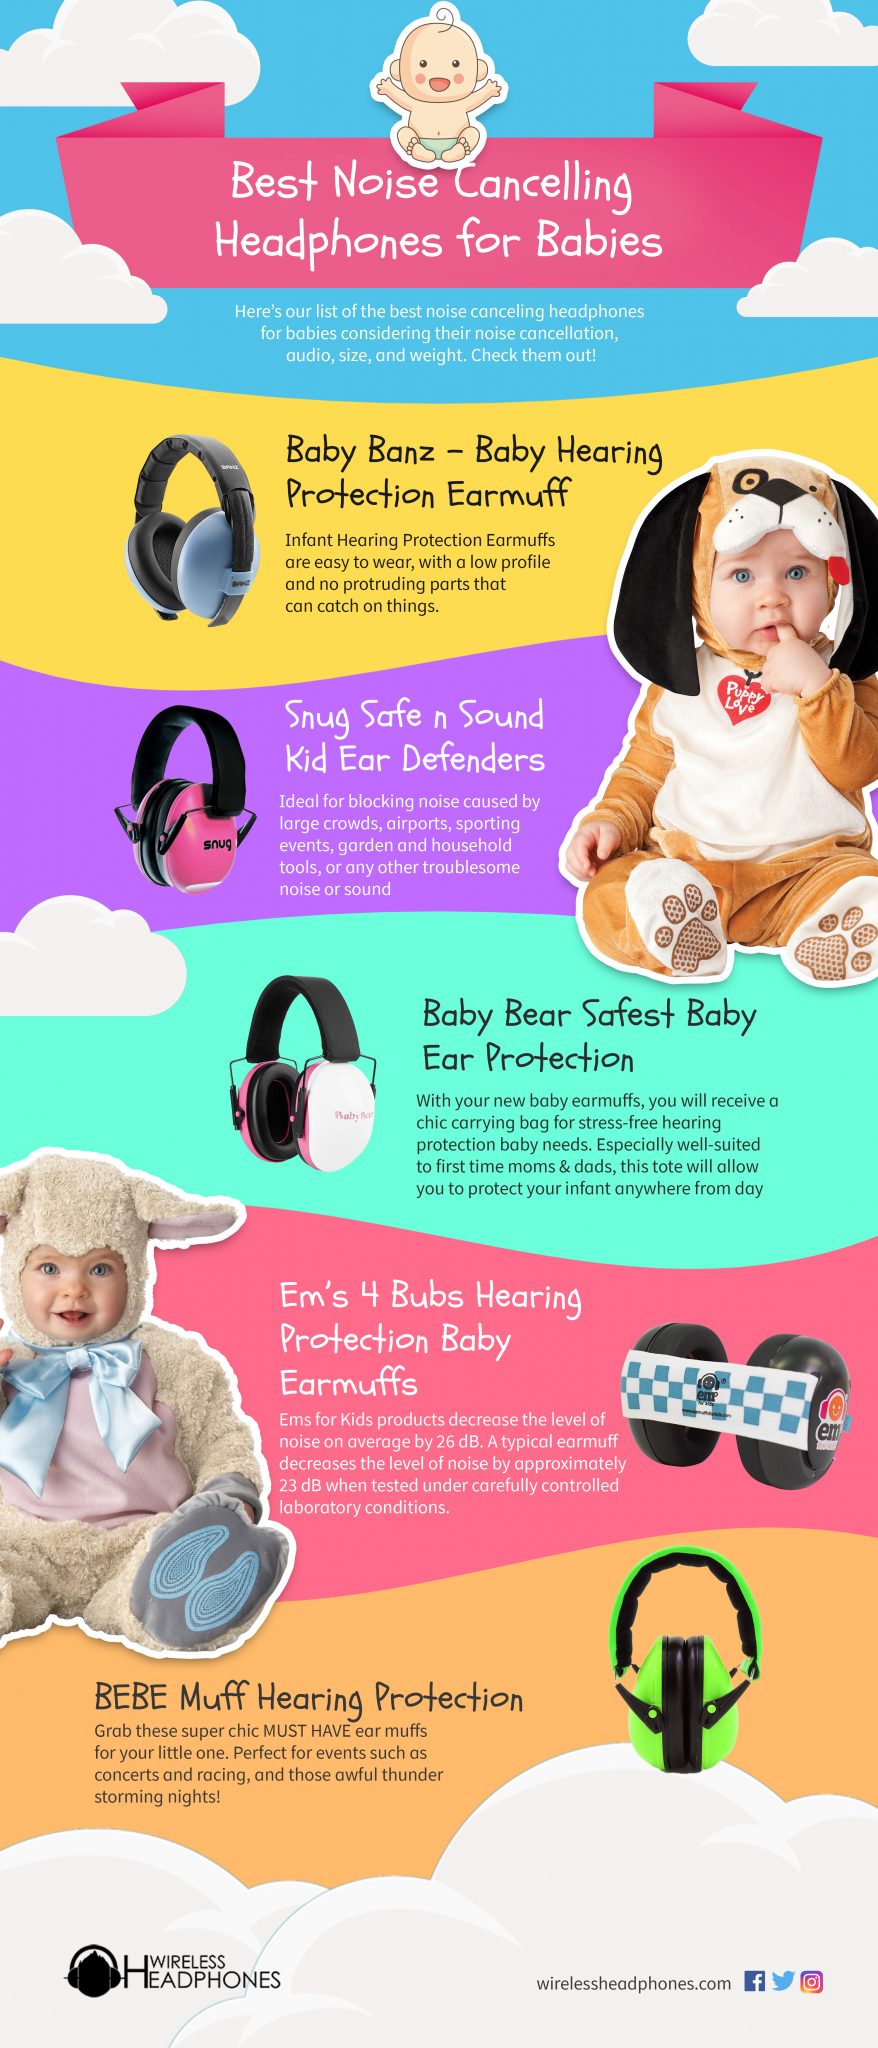 Best Noise Cancelling Headphones for Babies